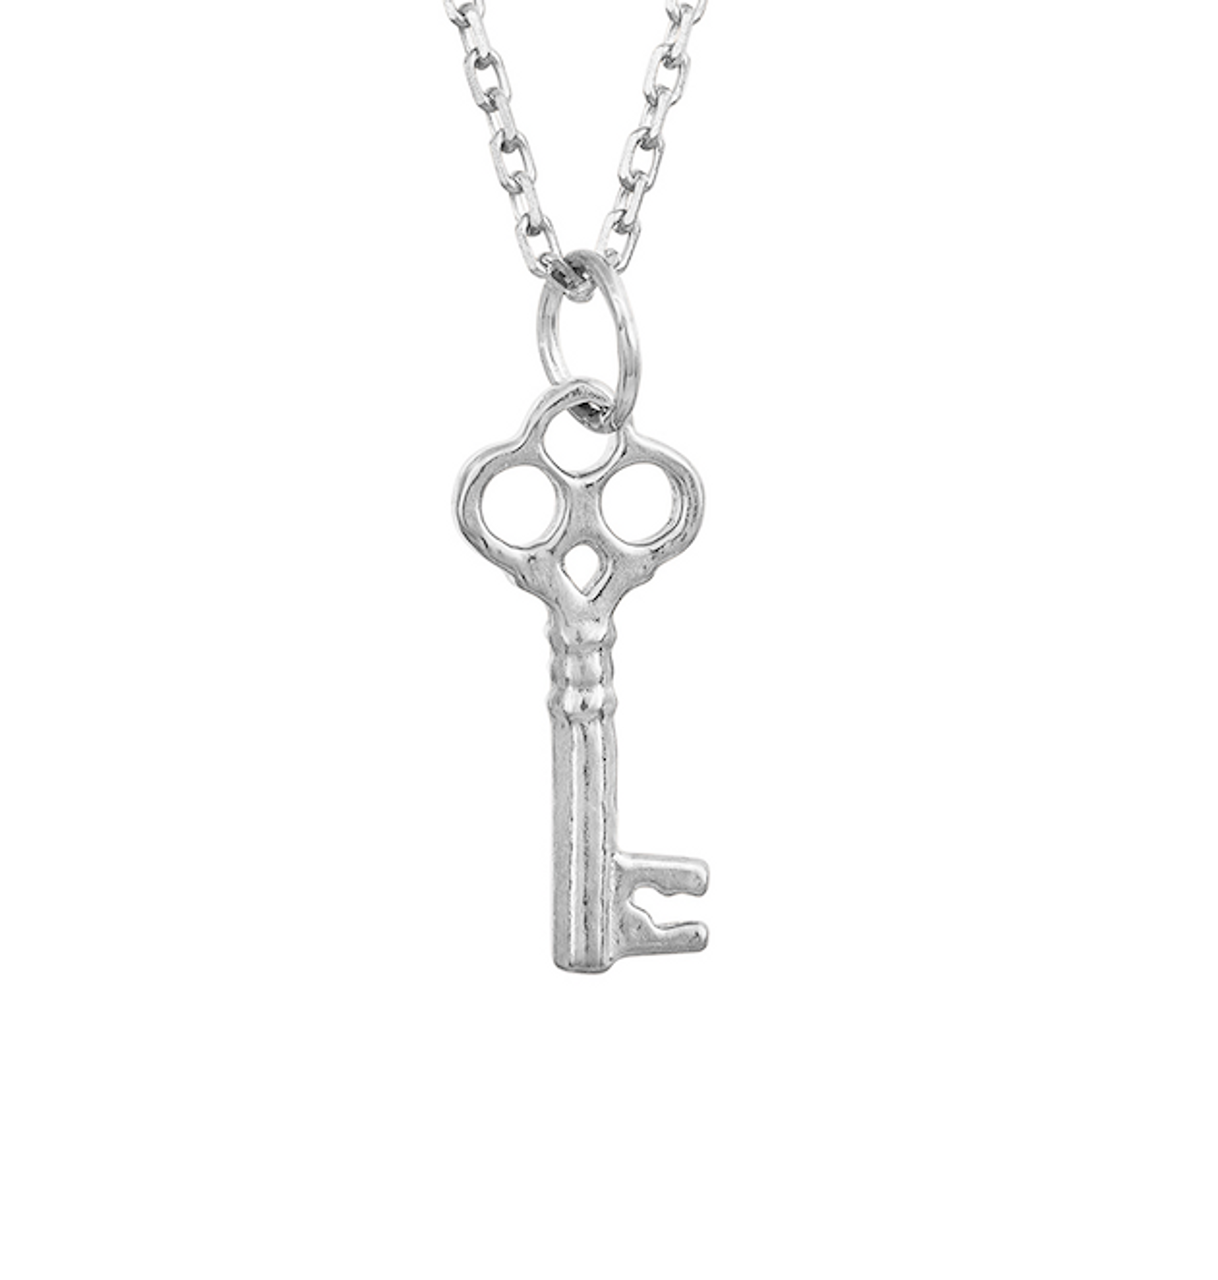 925 Sterling Silver Key Necklace Chain 